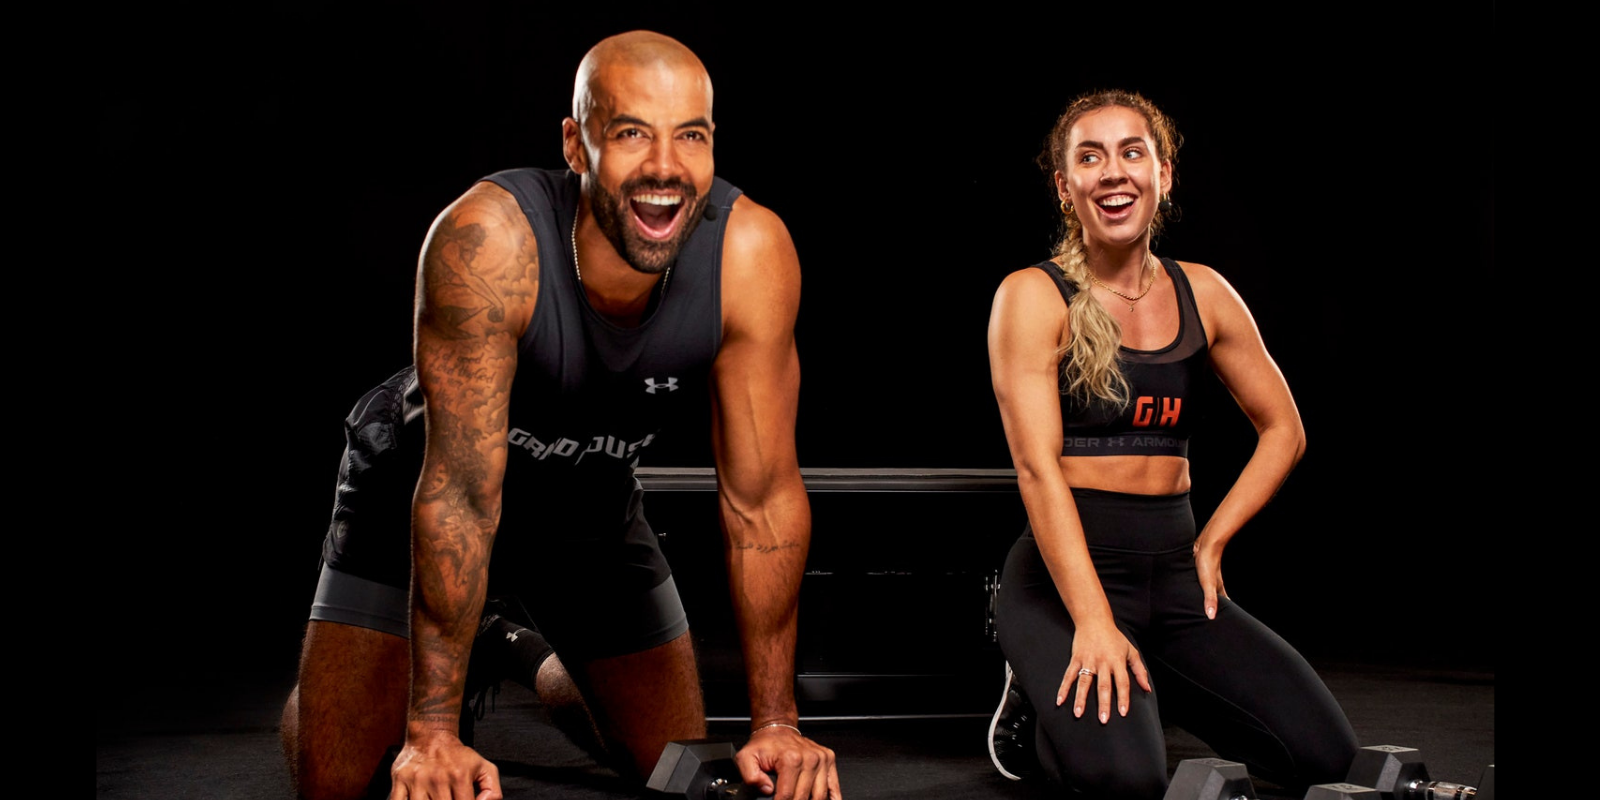 GRNDHOUSE Raises £1.5M To Strengthen Hold On UK’s At-Home Fitness Market 